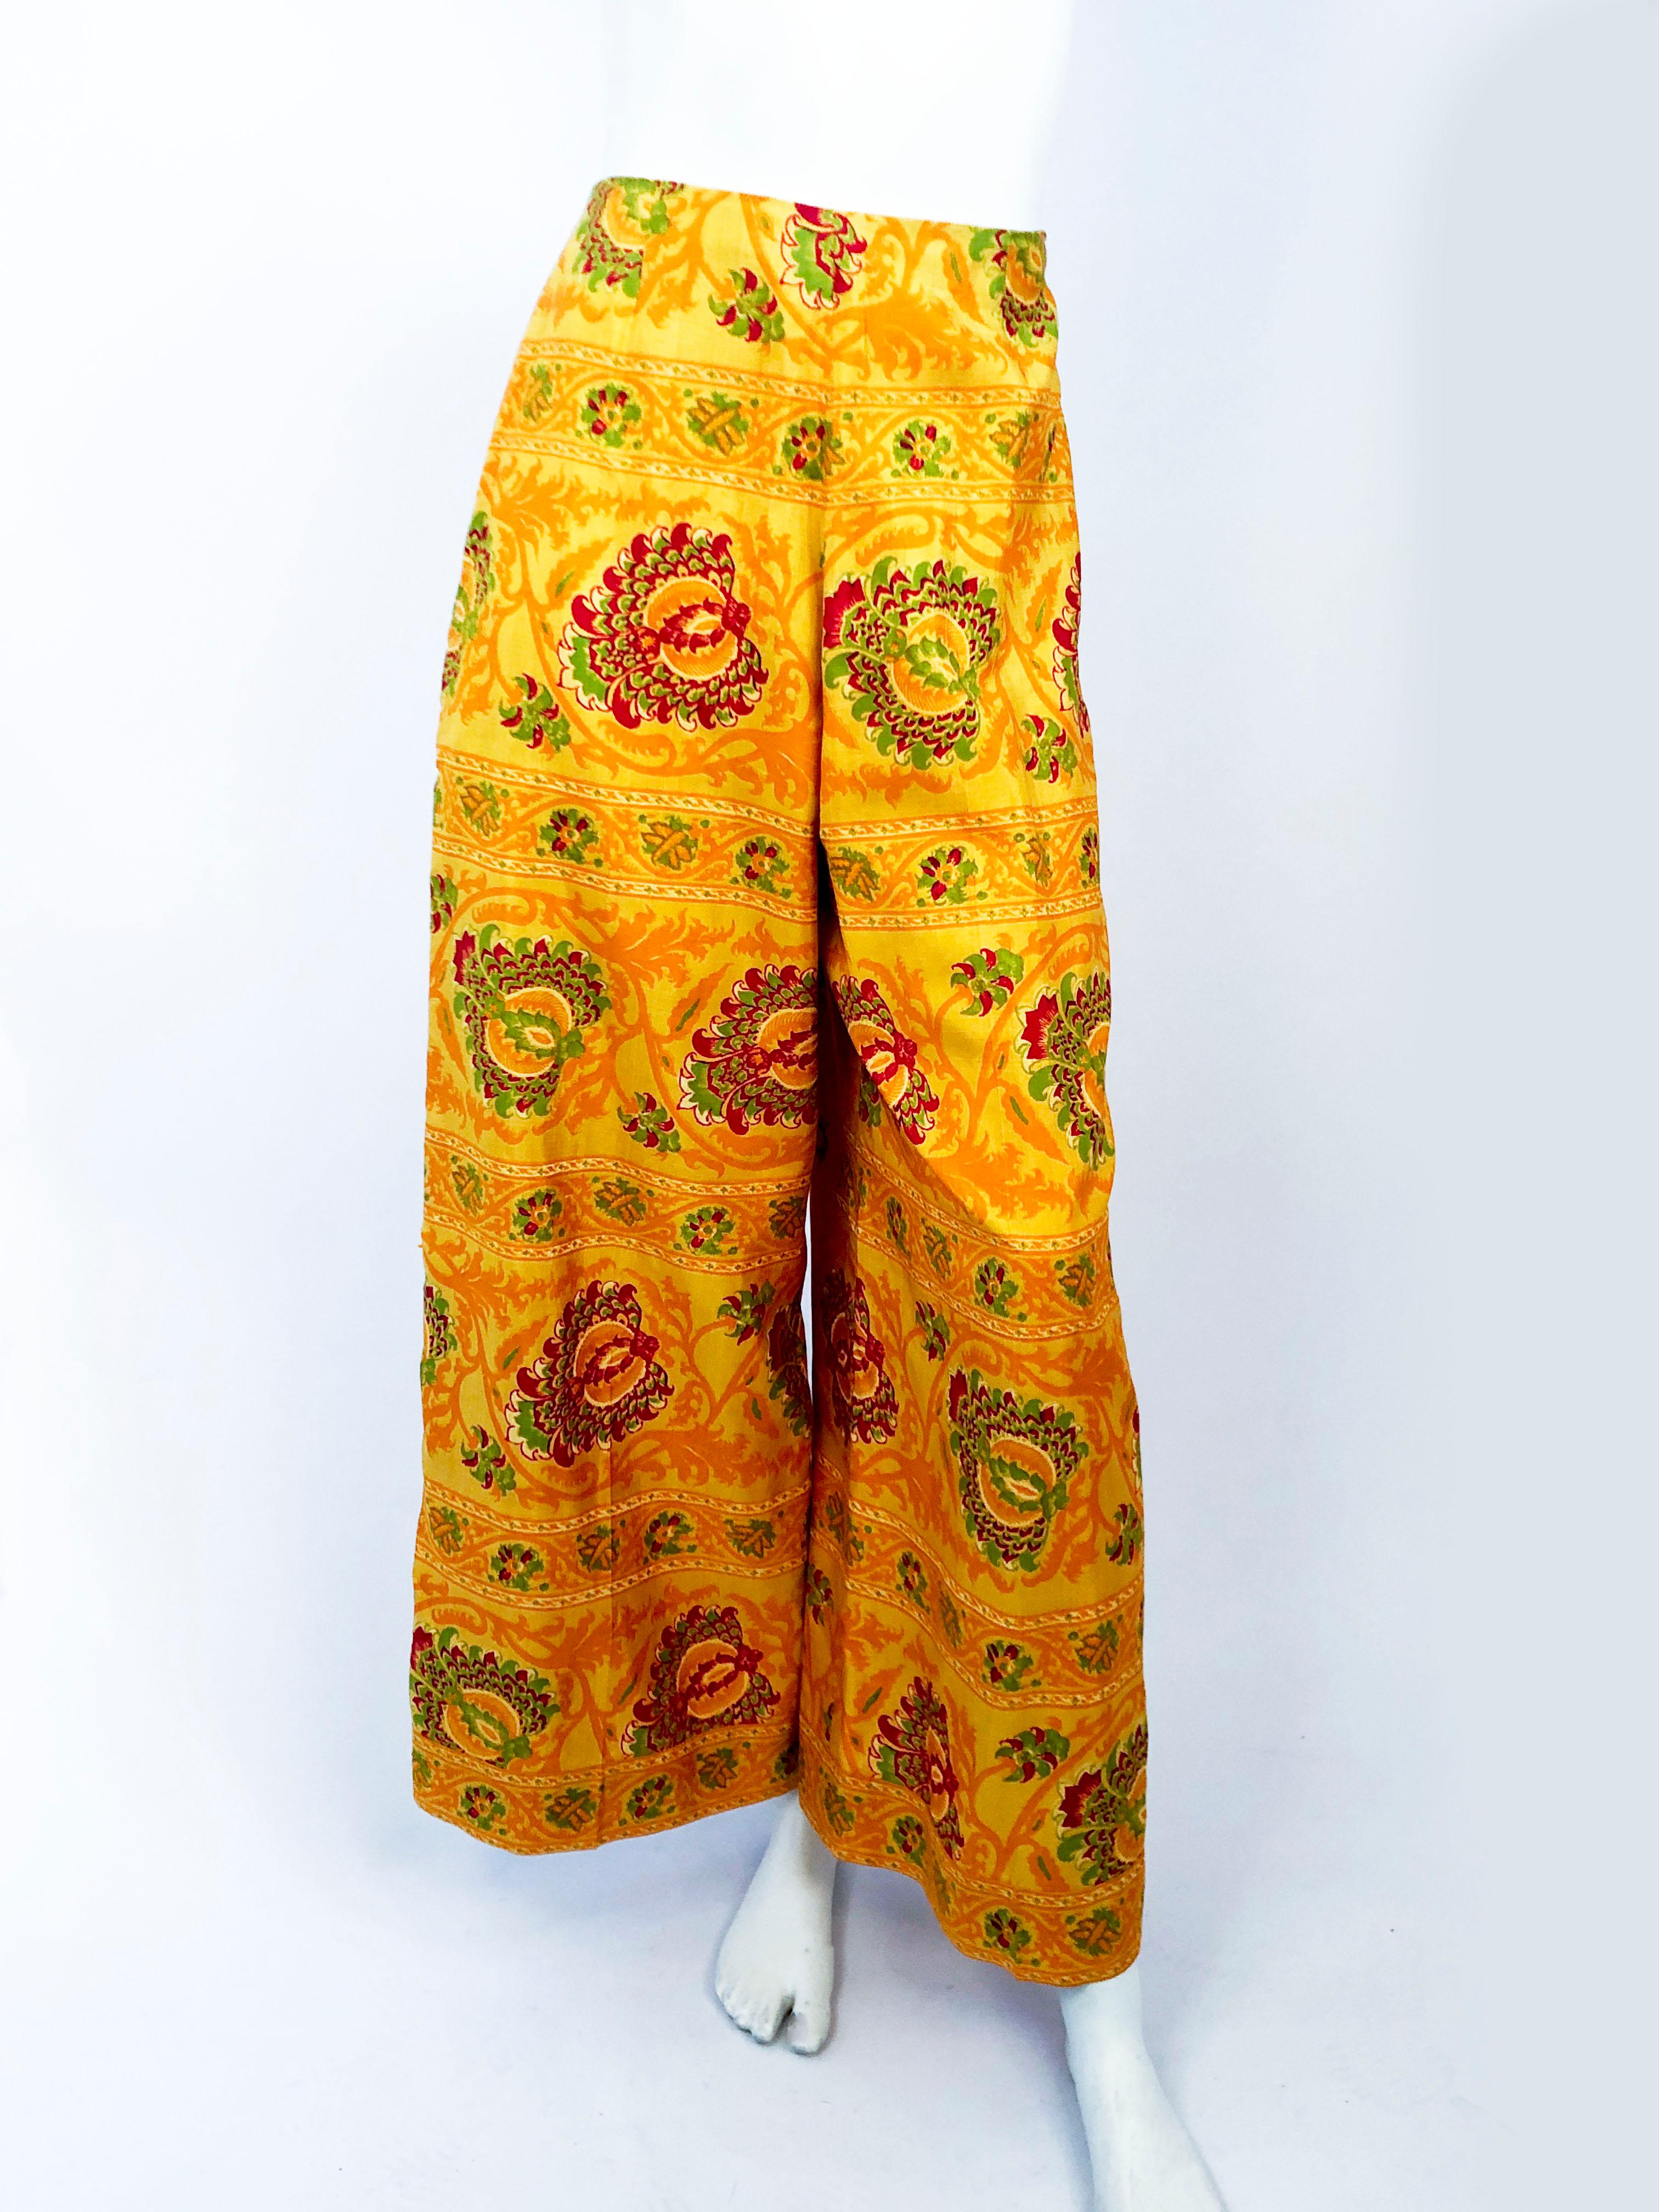 1960s Gump's Thai Printed Silk Tunic with Matching Pants In Good Condition For Sale In San Francisco, CA